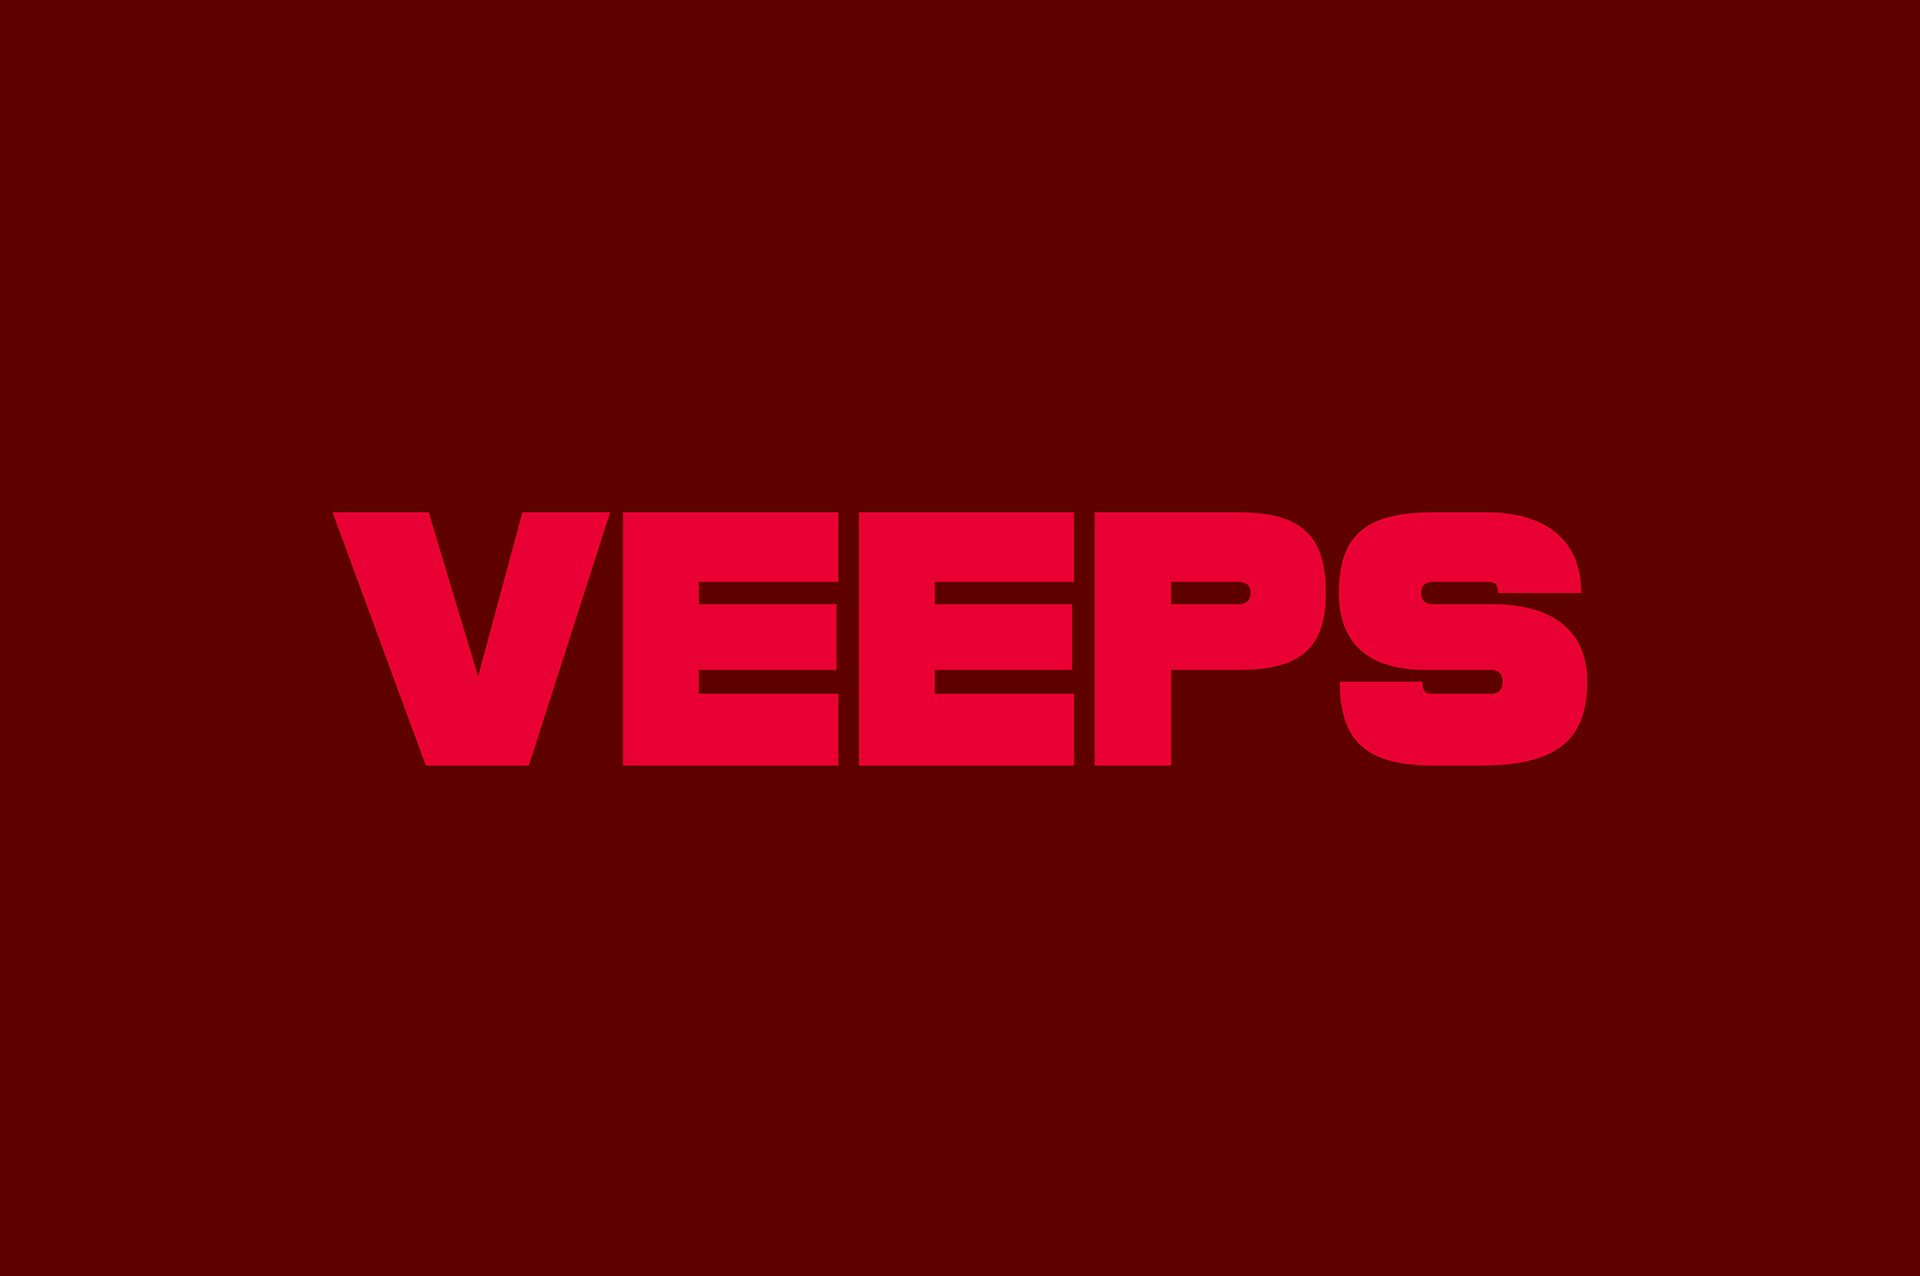 Veeps wordmark in red blocky uppercase letters against a maroon background